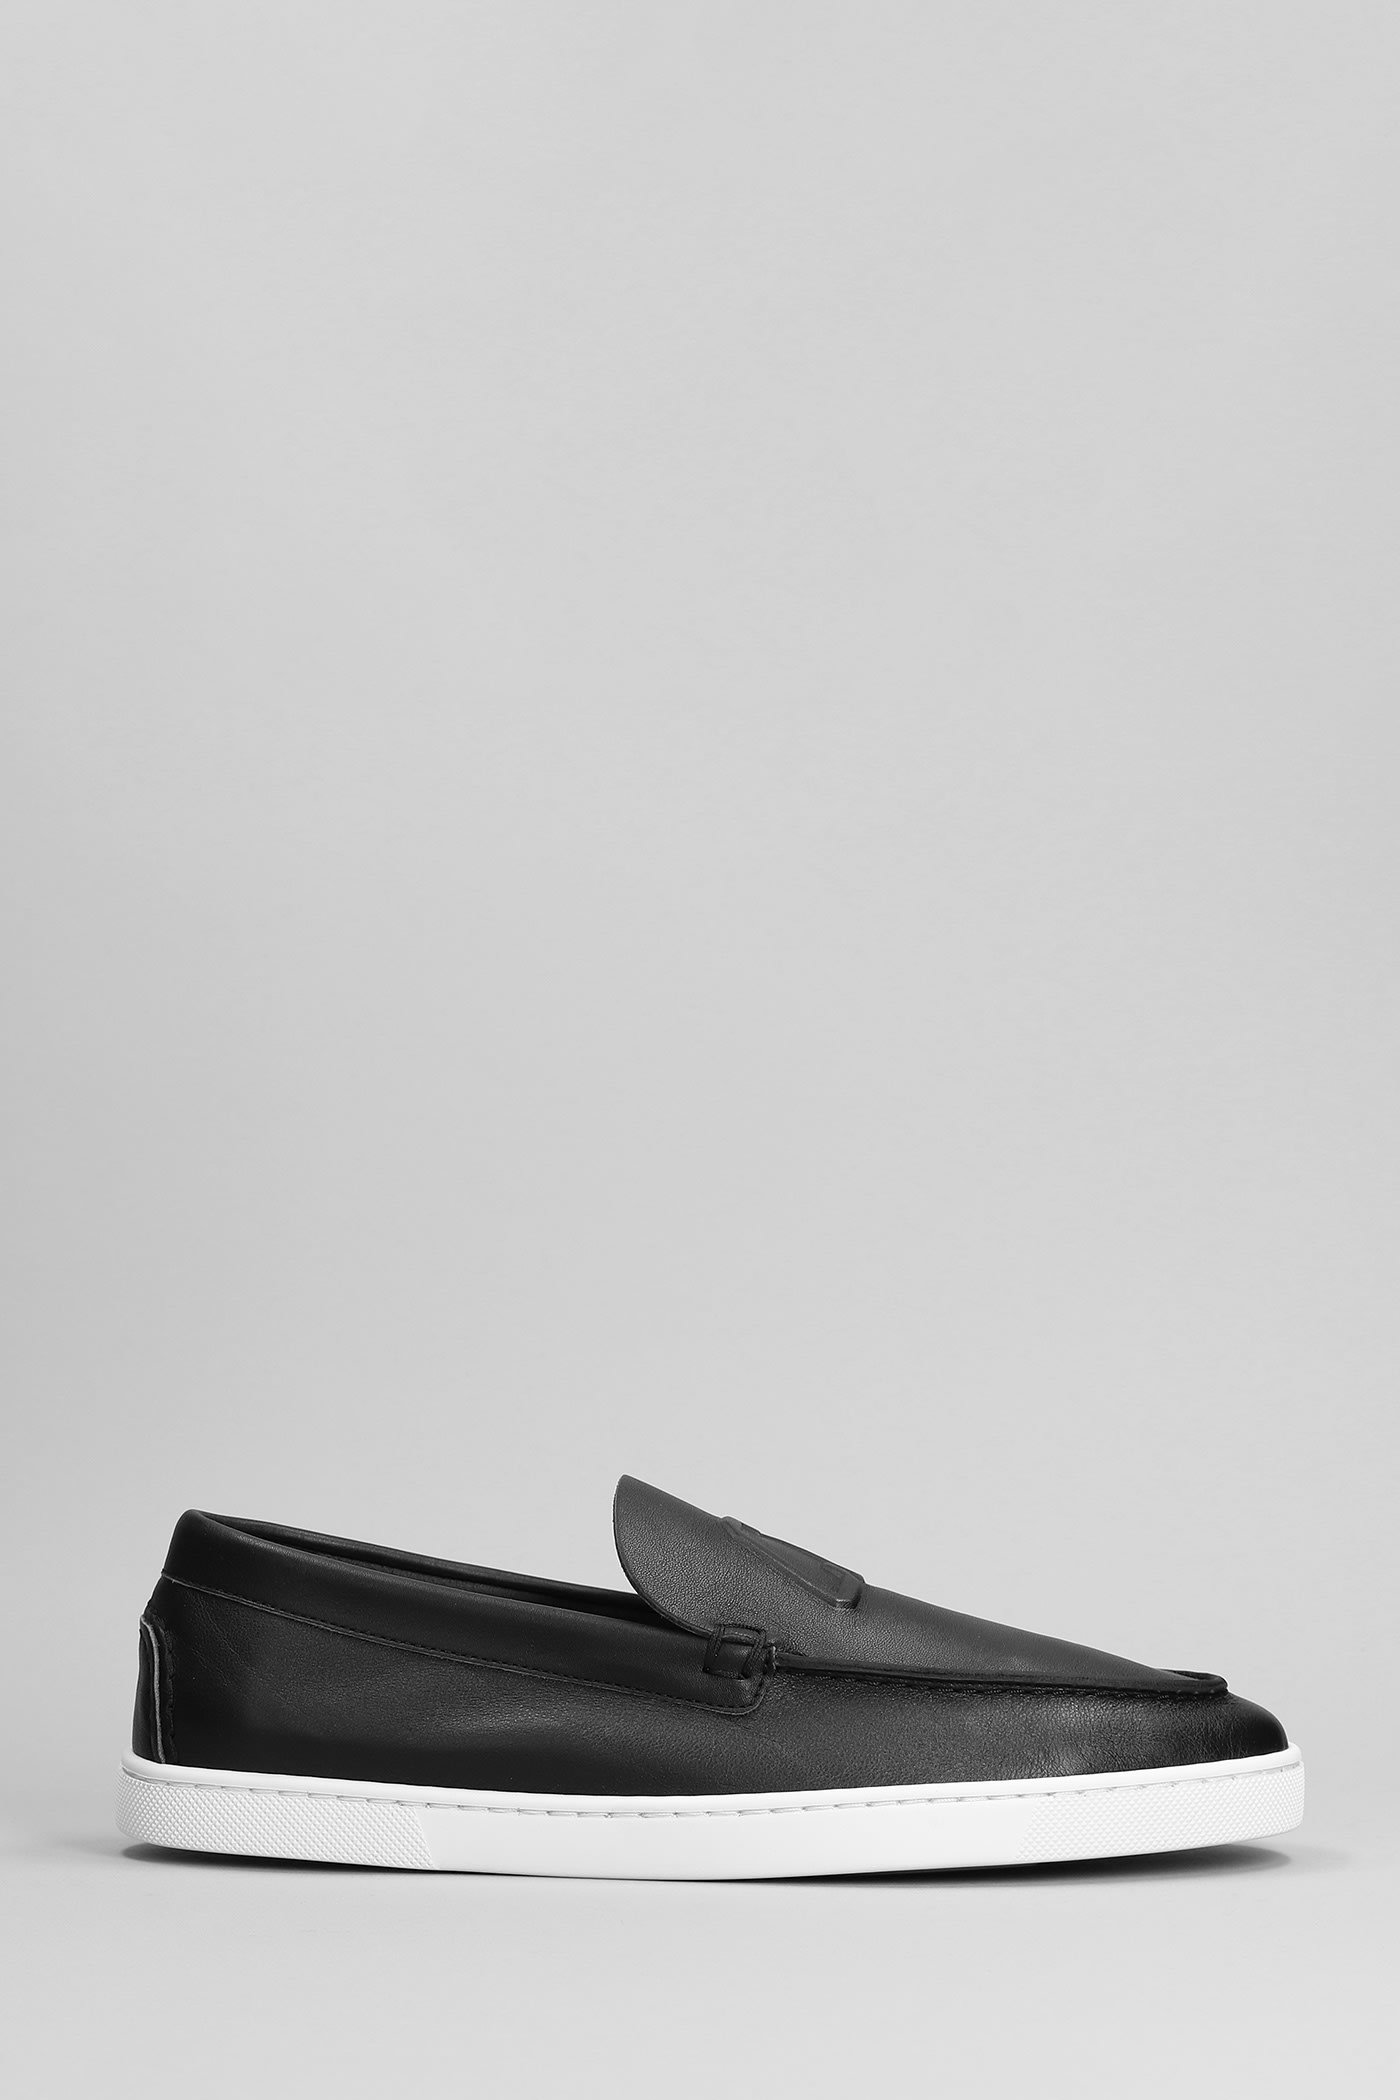 Shop Christian Louboutin Varsiboat Loafers In Black Leather